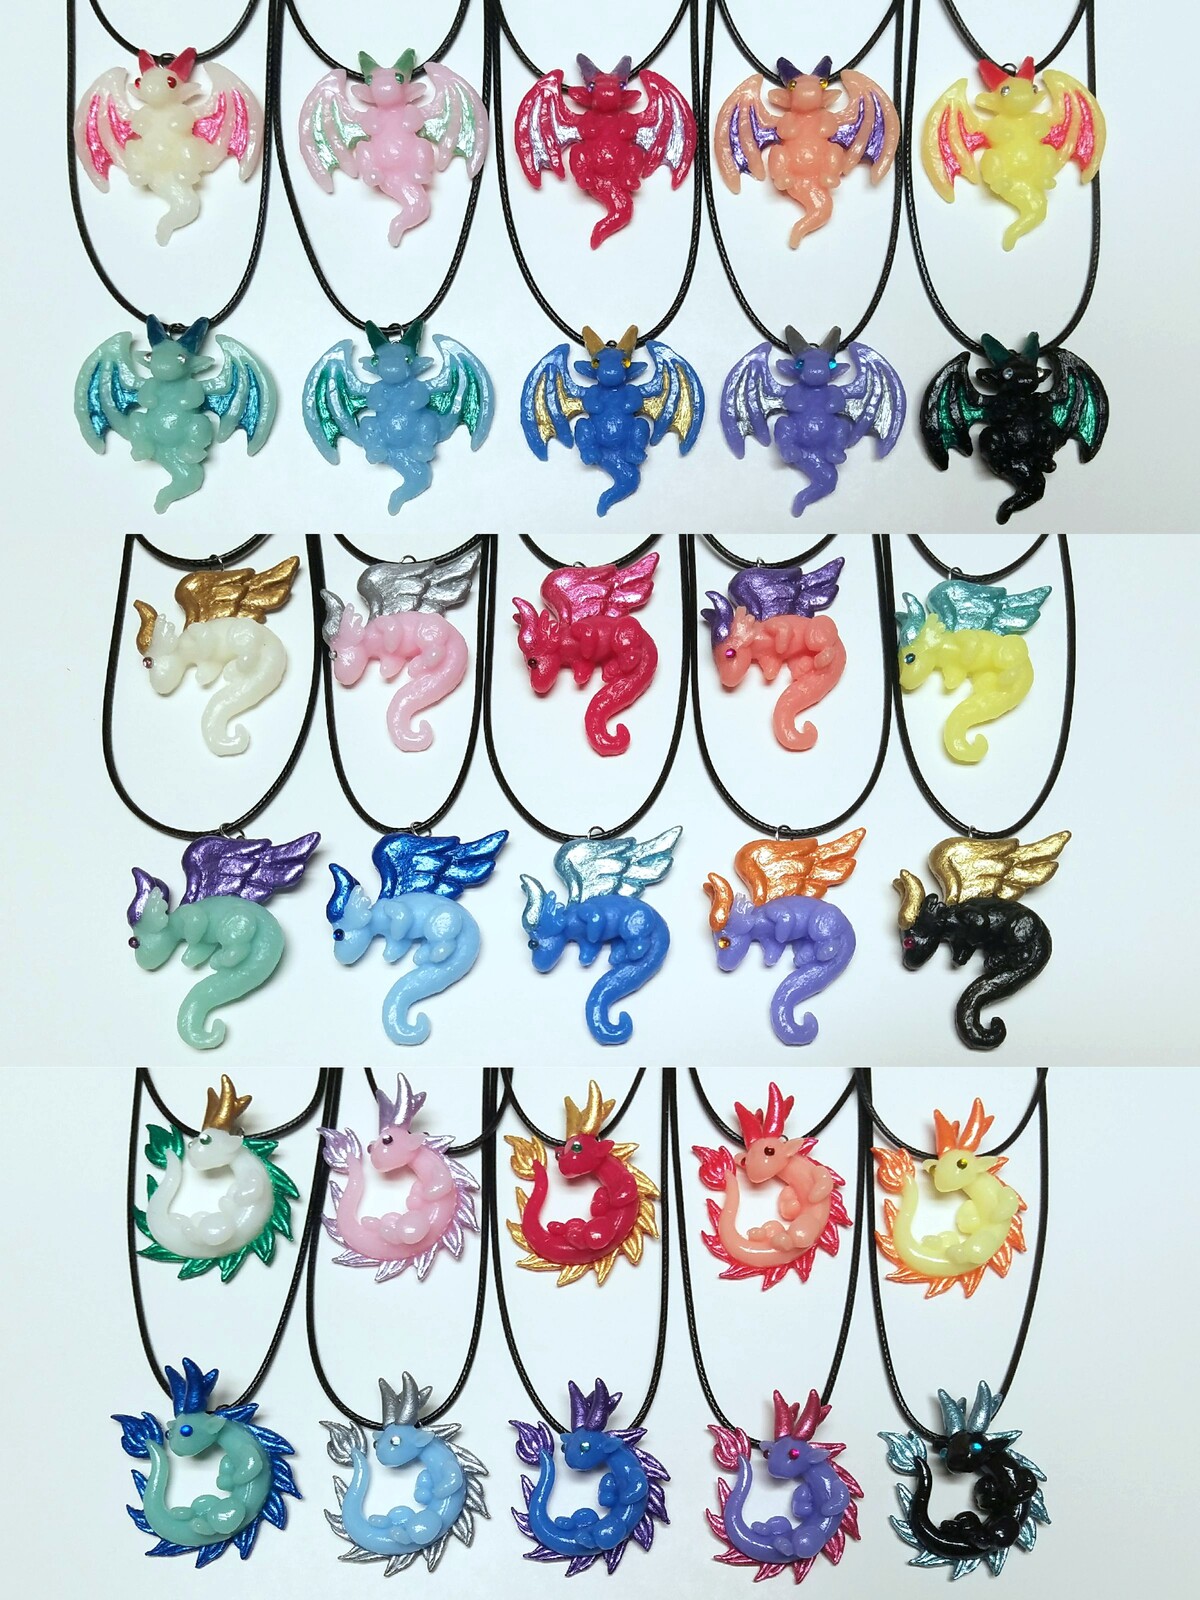 Dragon necklaces that can also be magnets. Roughly 1.5-2 inches and come in a variety of colors and styles. Resin cast with hand painted details. 